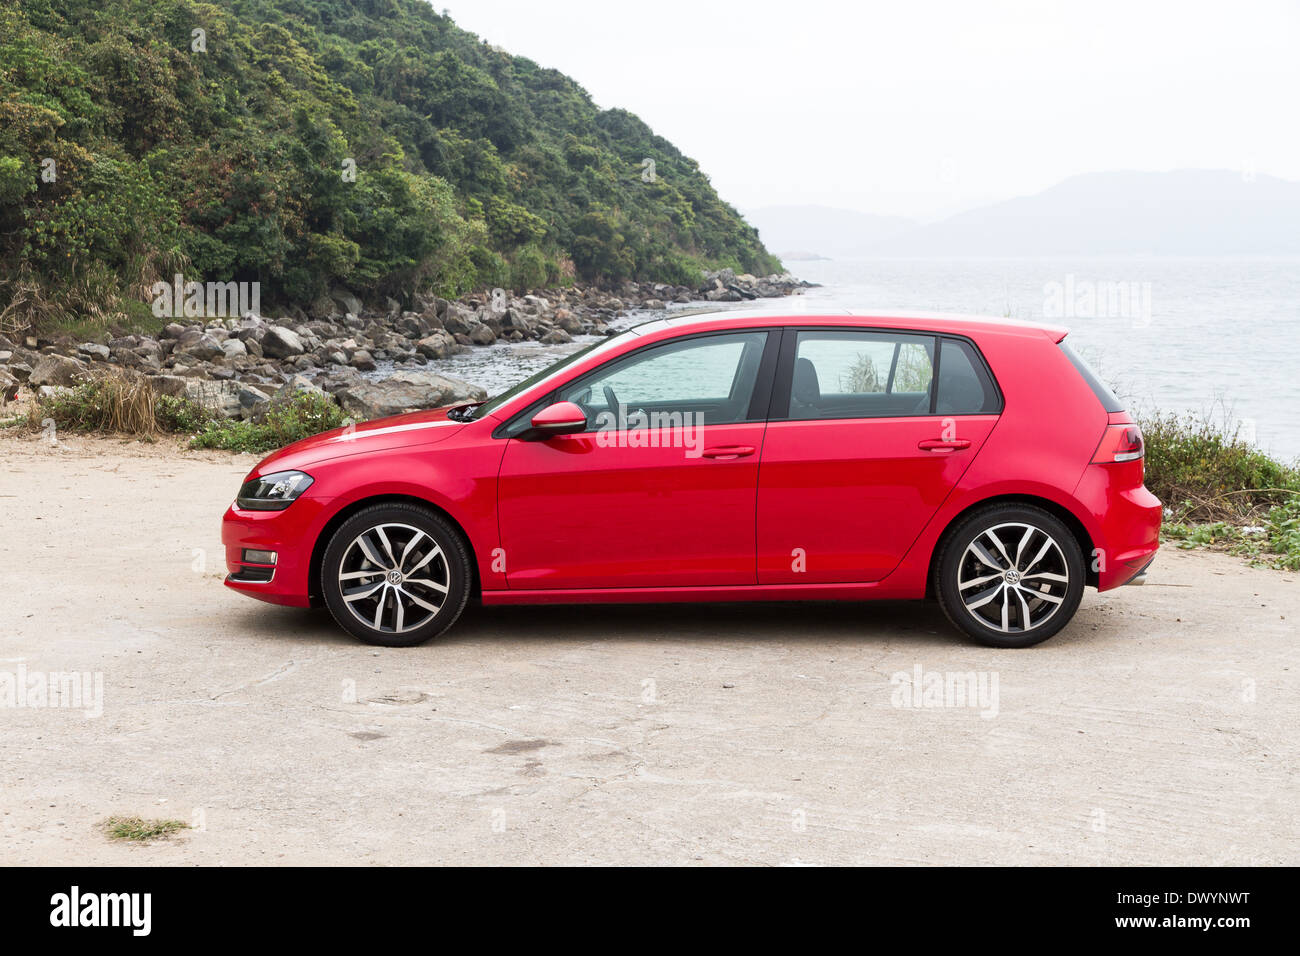 Volkswagen Golf VII GT 2013 Model with red colour Stock Photo - Alamy